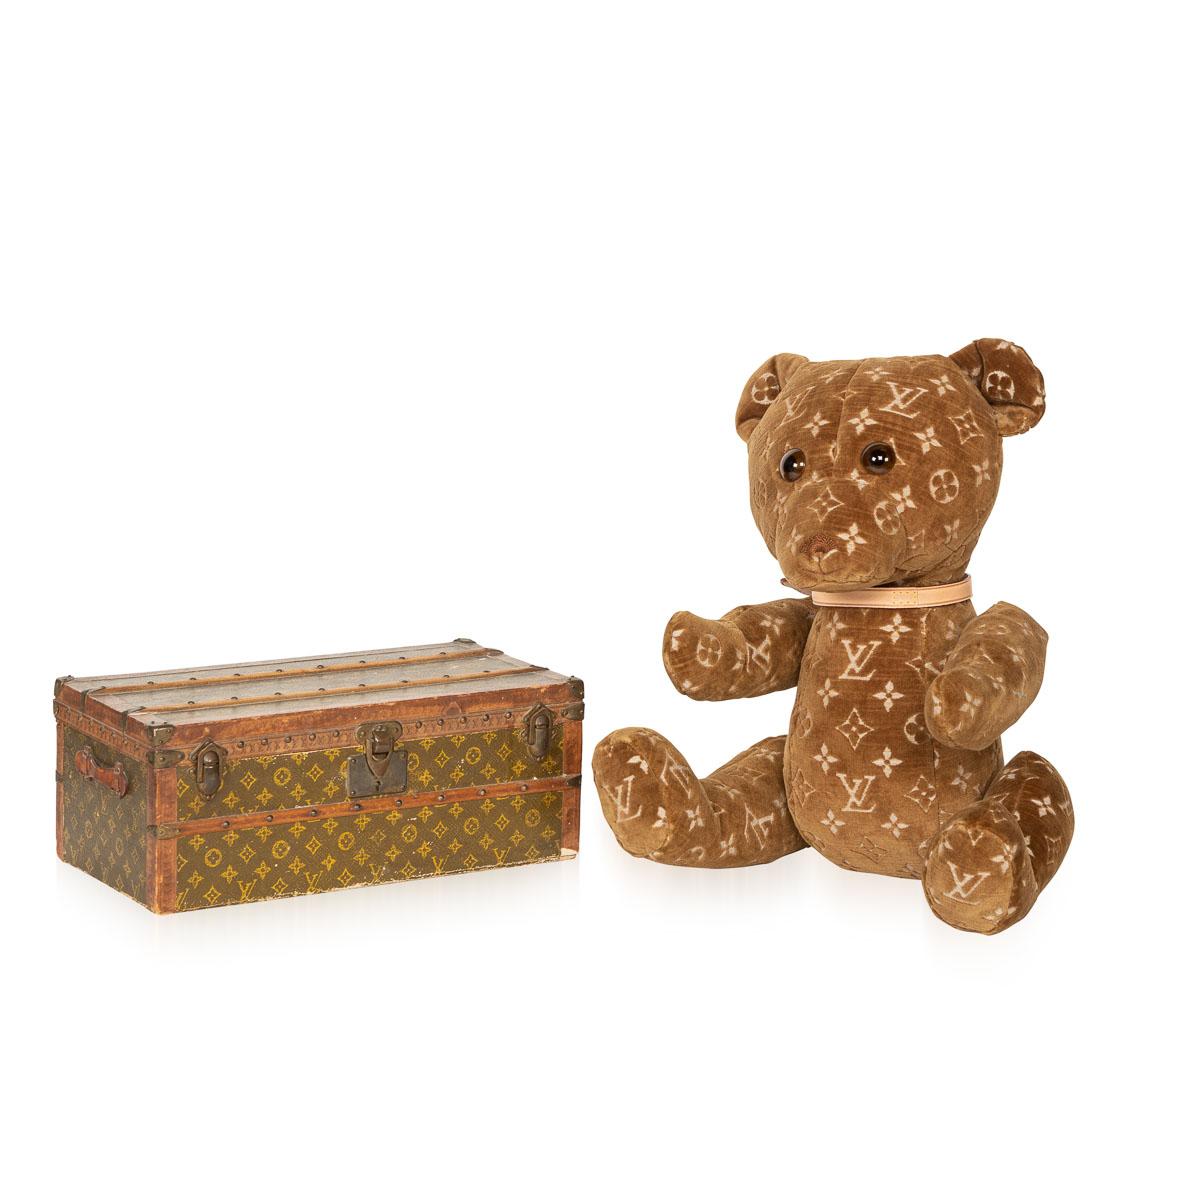 First seen on the Runway in 2004, the “DouDou” Teddy Bear is the only teddy bear created by Louis Vuitton in its 150 year history. The teddy was originally designed by Marc Jacobs for Louis Vuitton's Men's Spring-Summer 2005 Collection and later